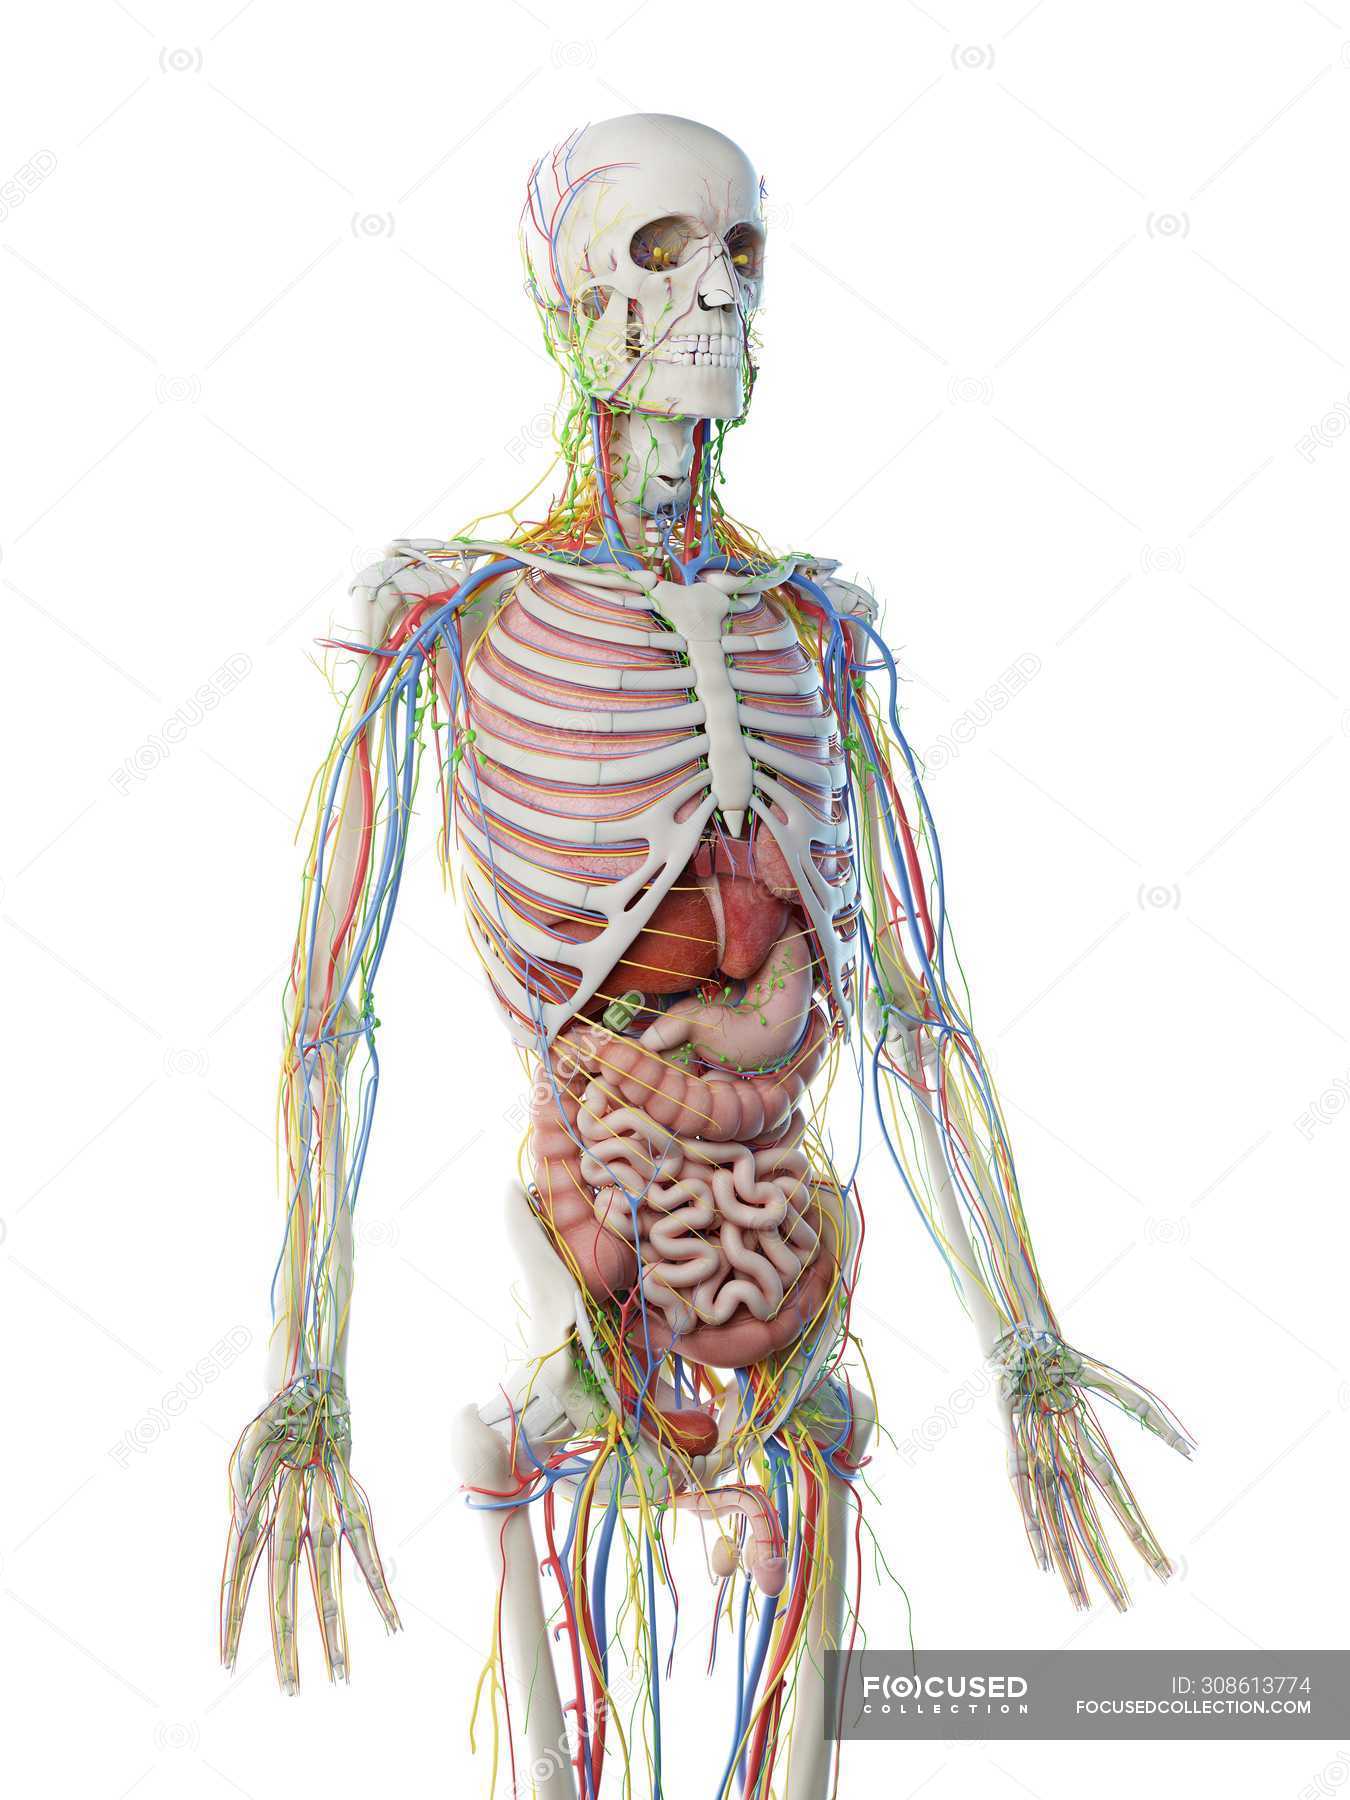 Male Upper Body Anatomy And Internal Organs Computer Illustration Biology Healthy Stock Photo 308613774